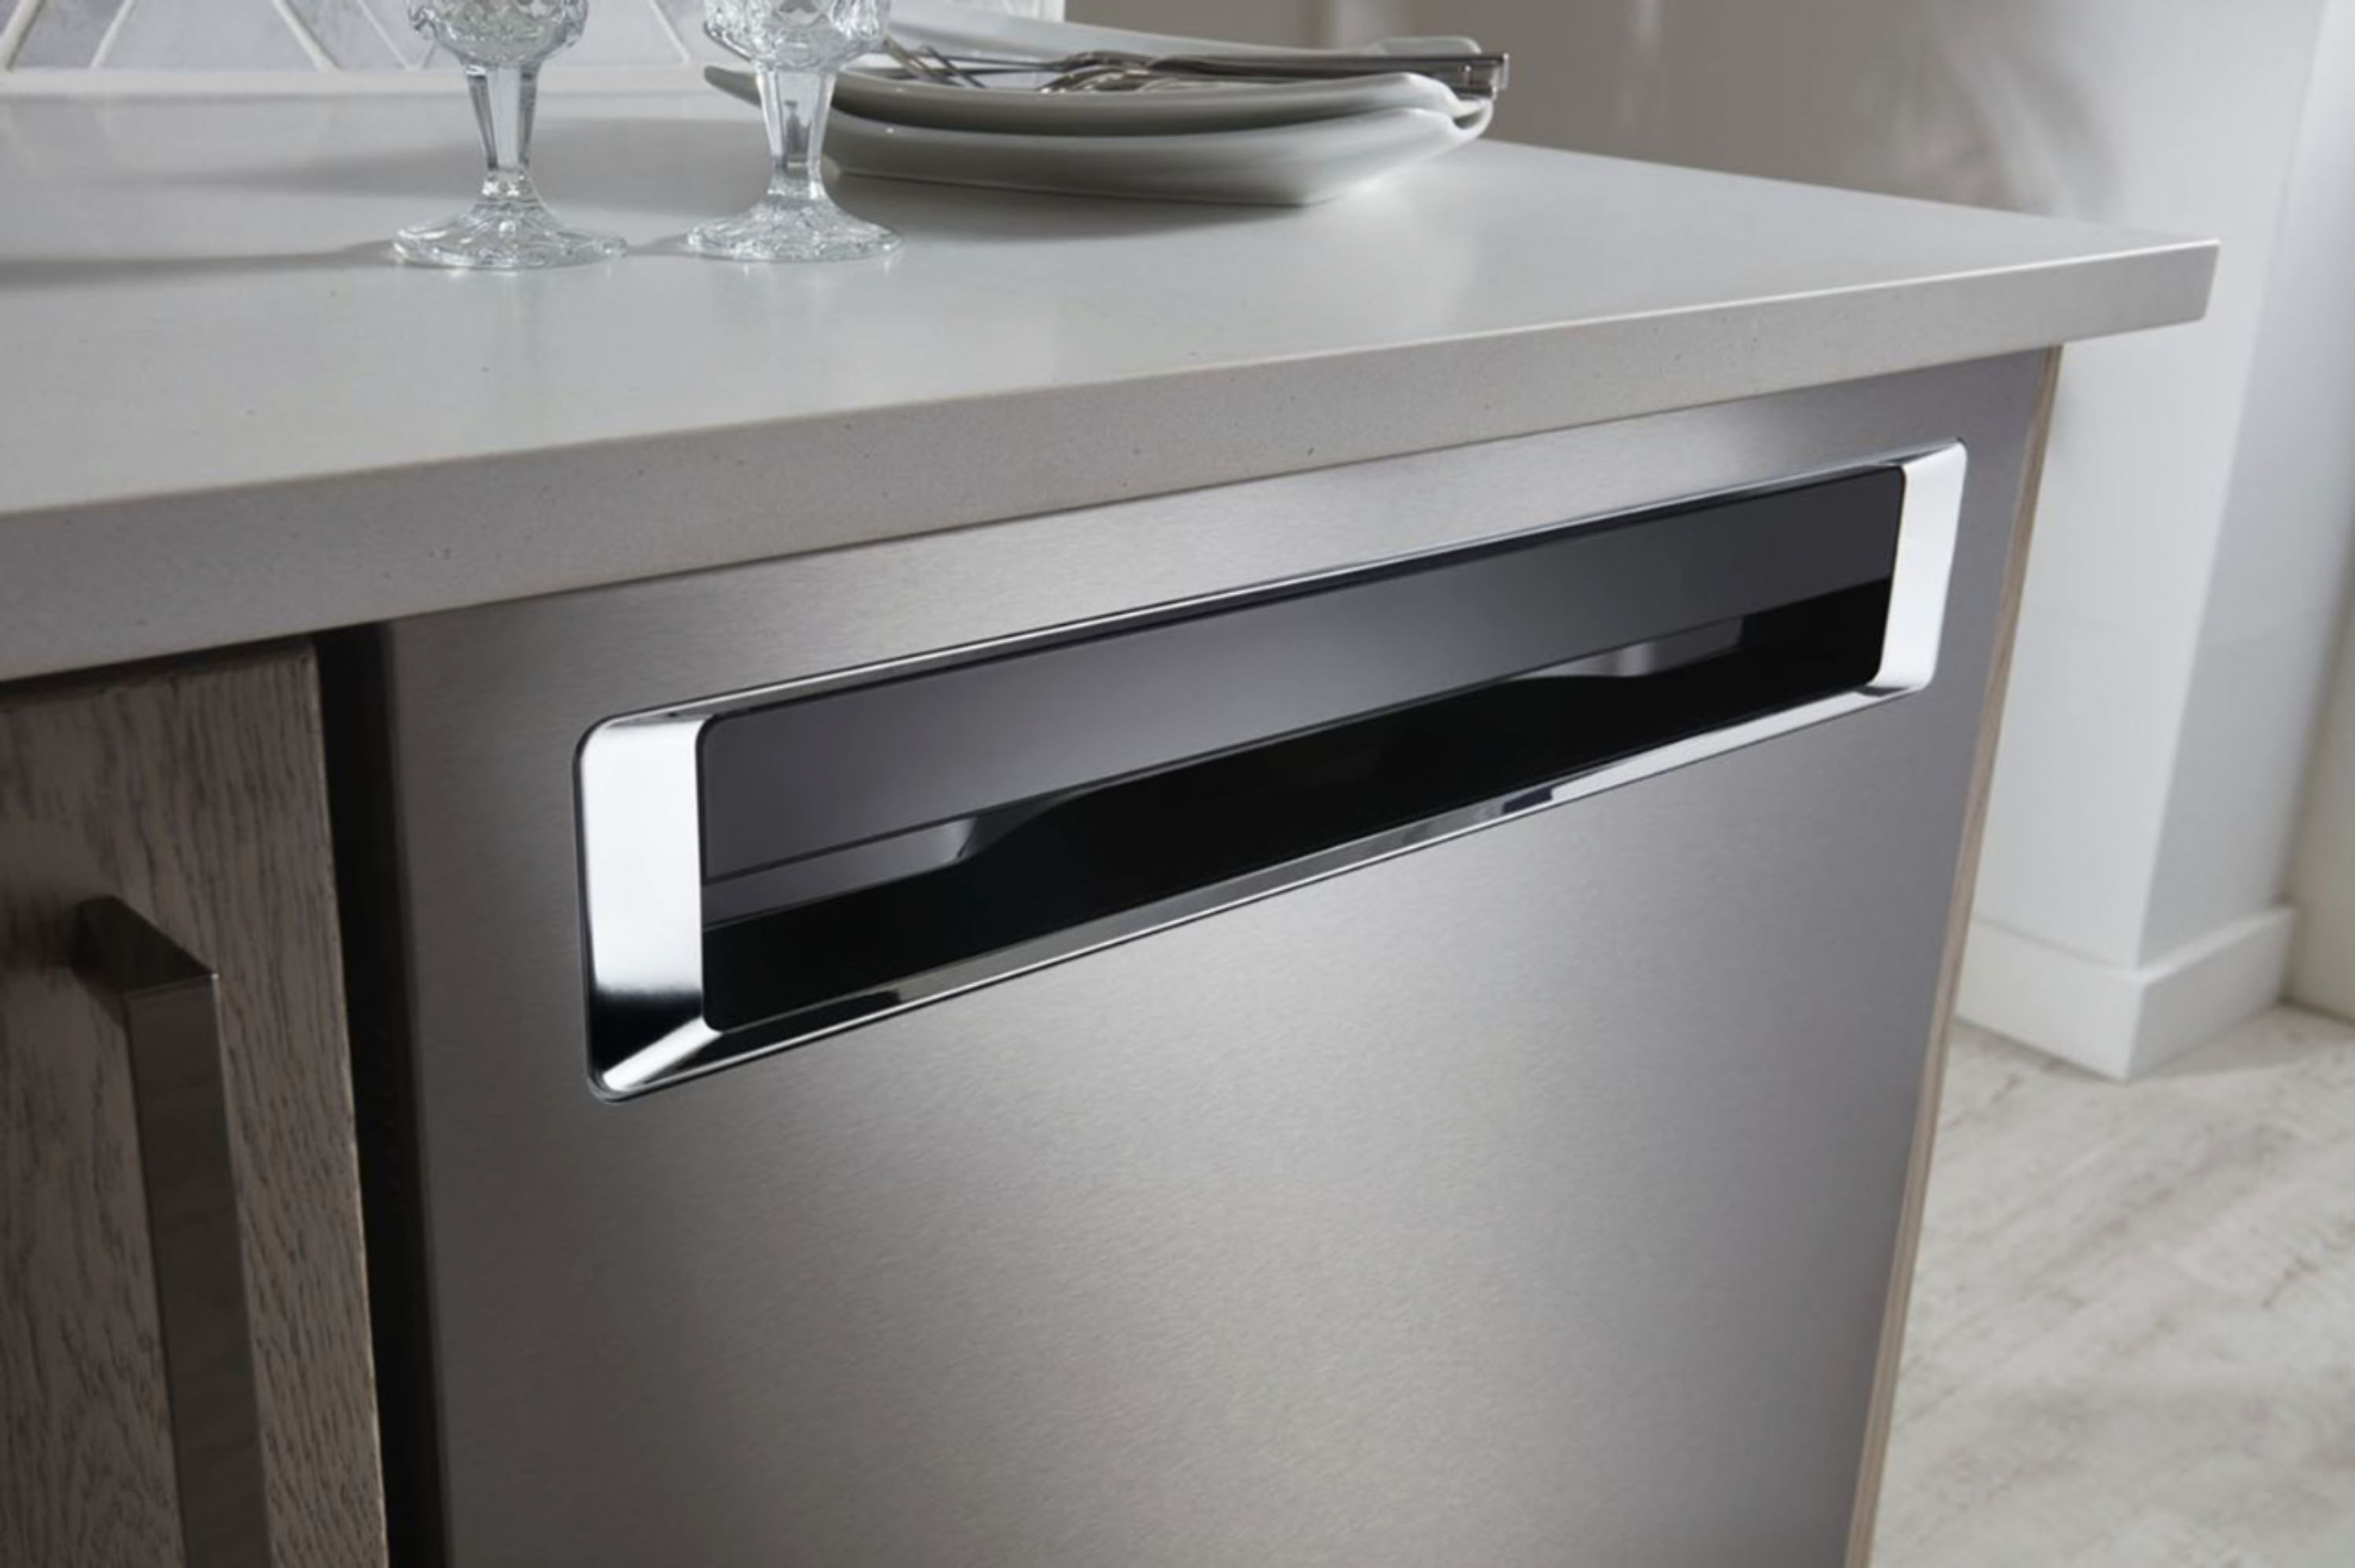 Where To Buy A Dishwasher